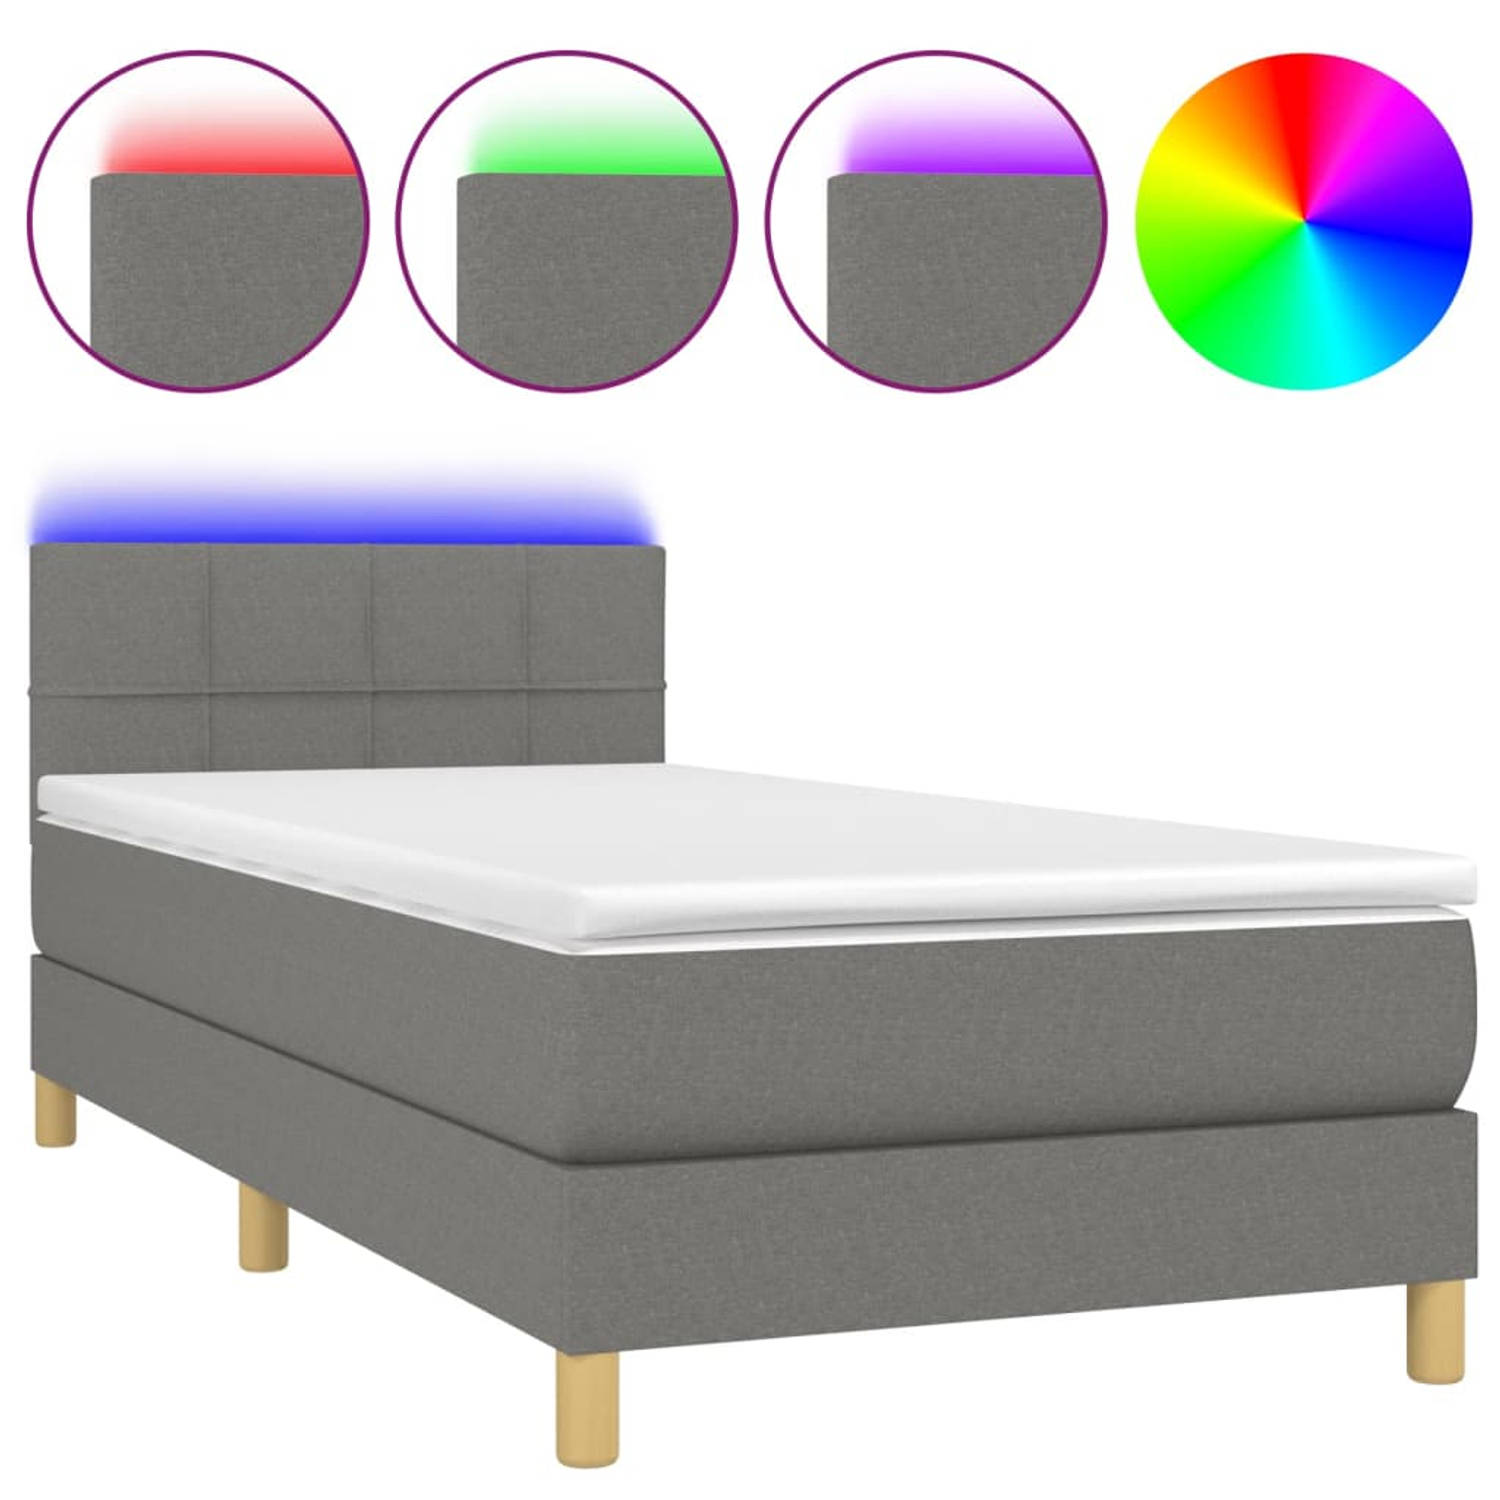 The Living Store Boxspring Bed - donkergrijs - 193 x 90 x 78/88 cm - Inclusief matras en LED